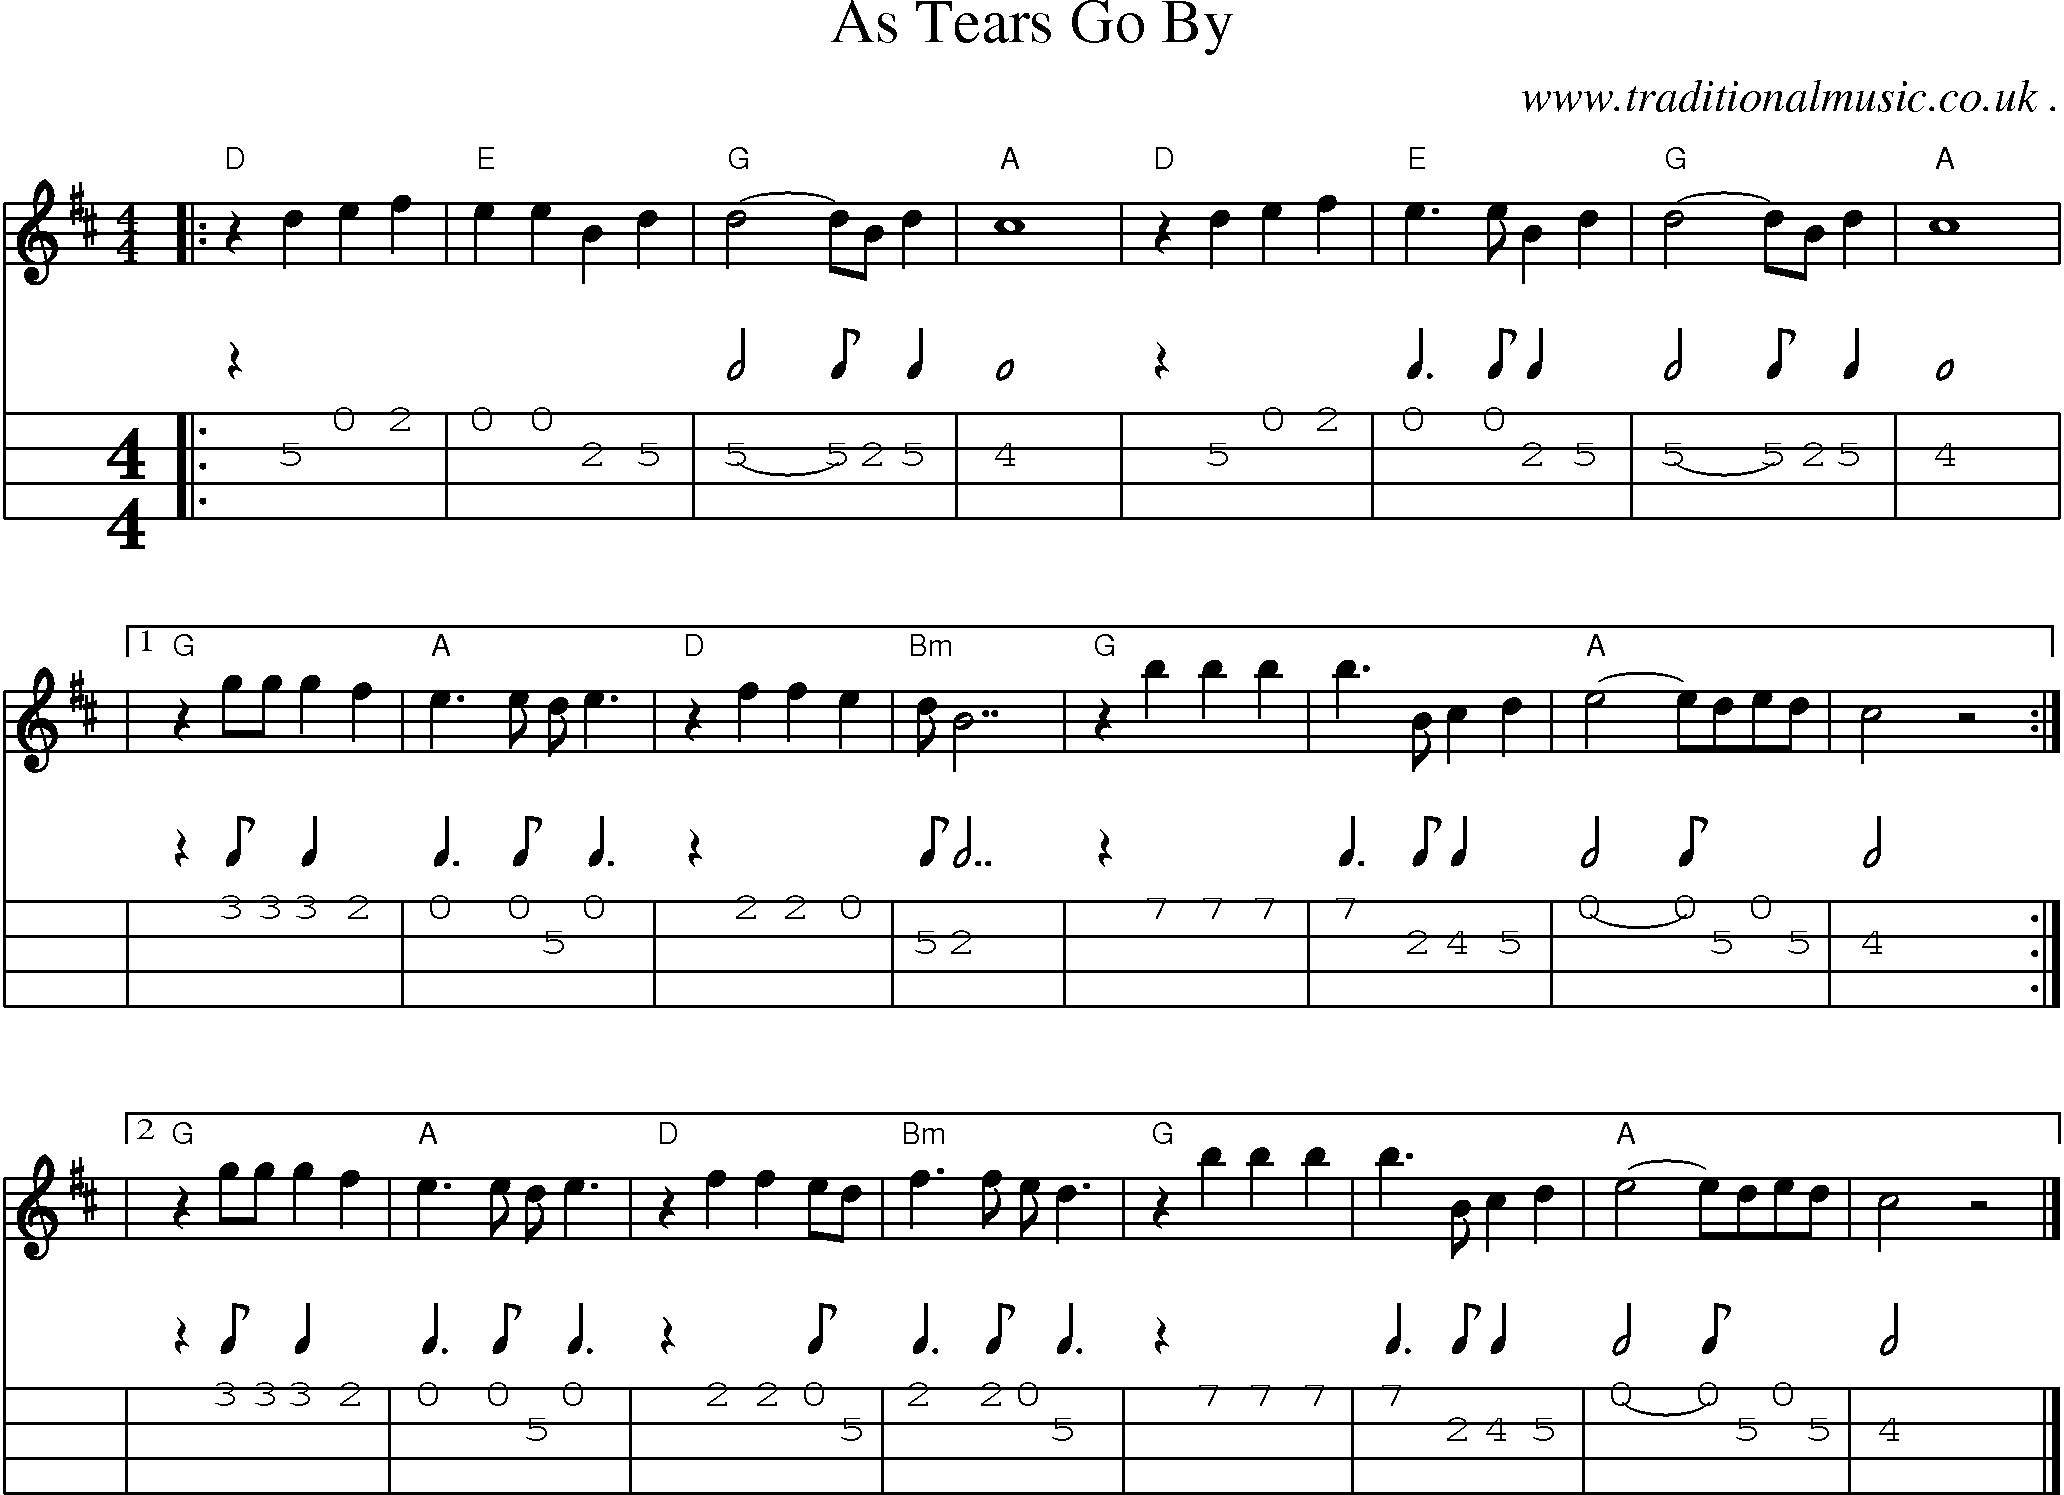 Sheet-music  score, Chords and Mandolin Tabs for As Tears Go By